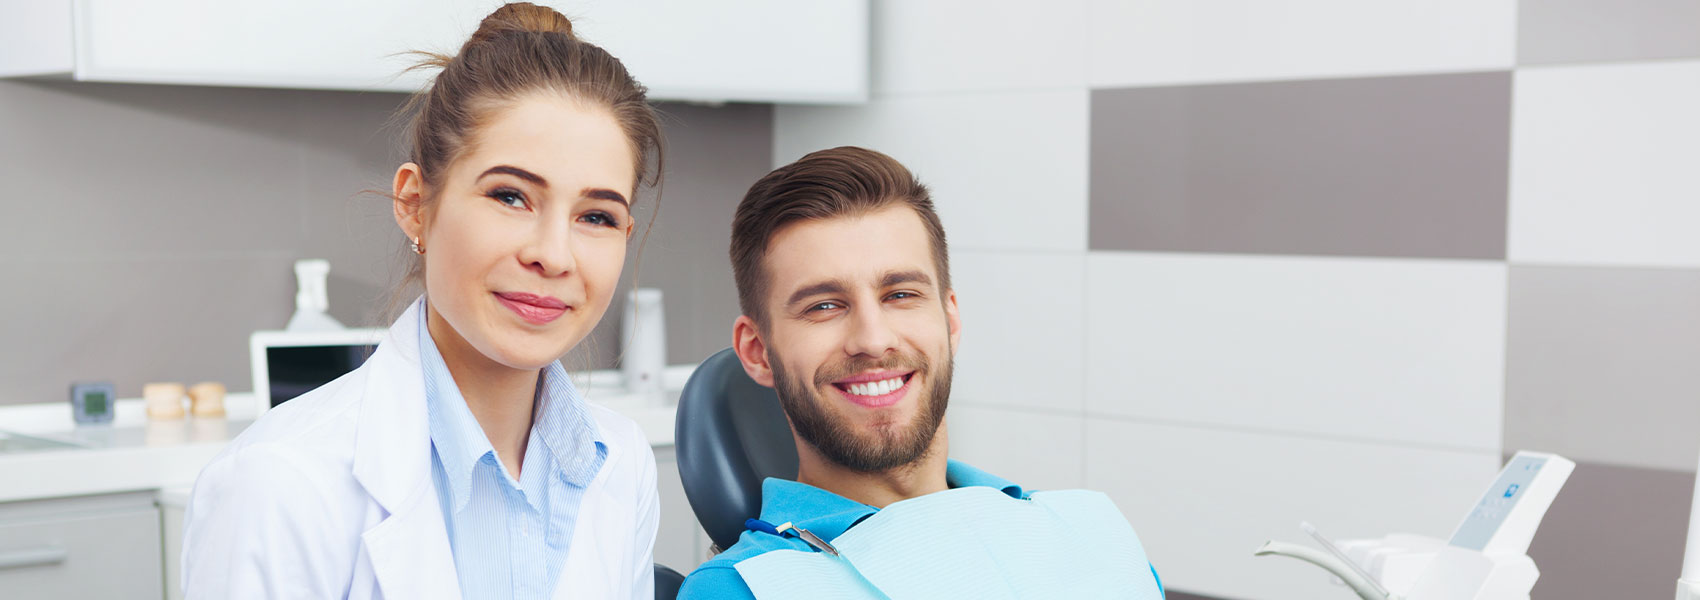 Dentist and patient smiling